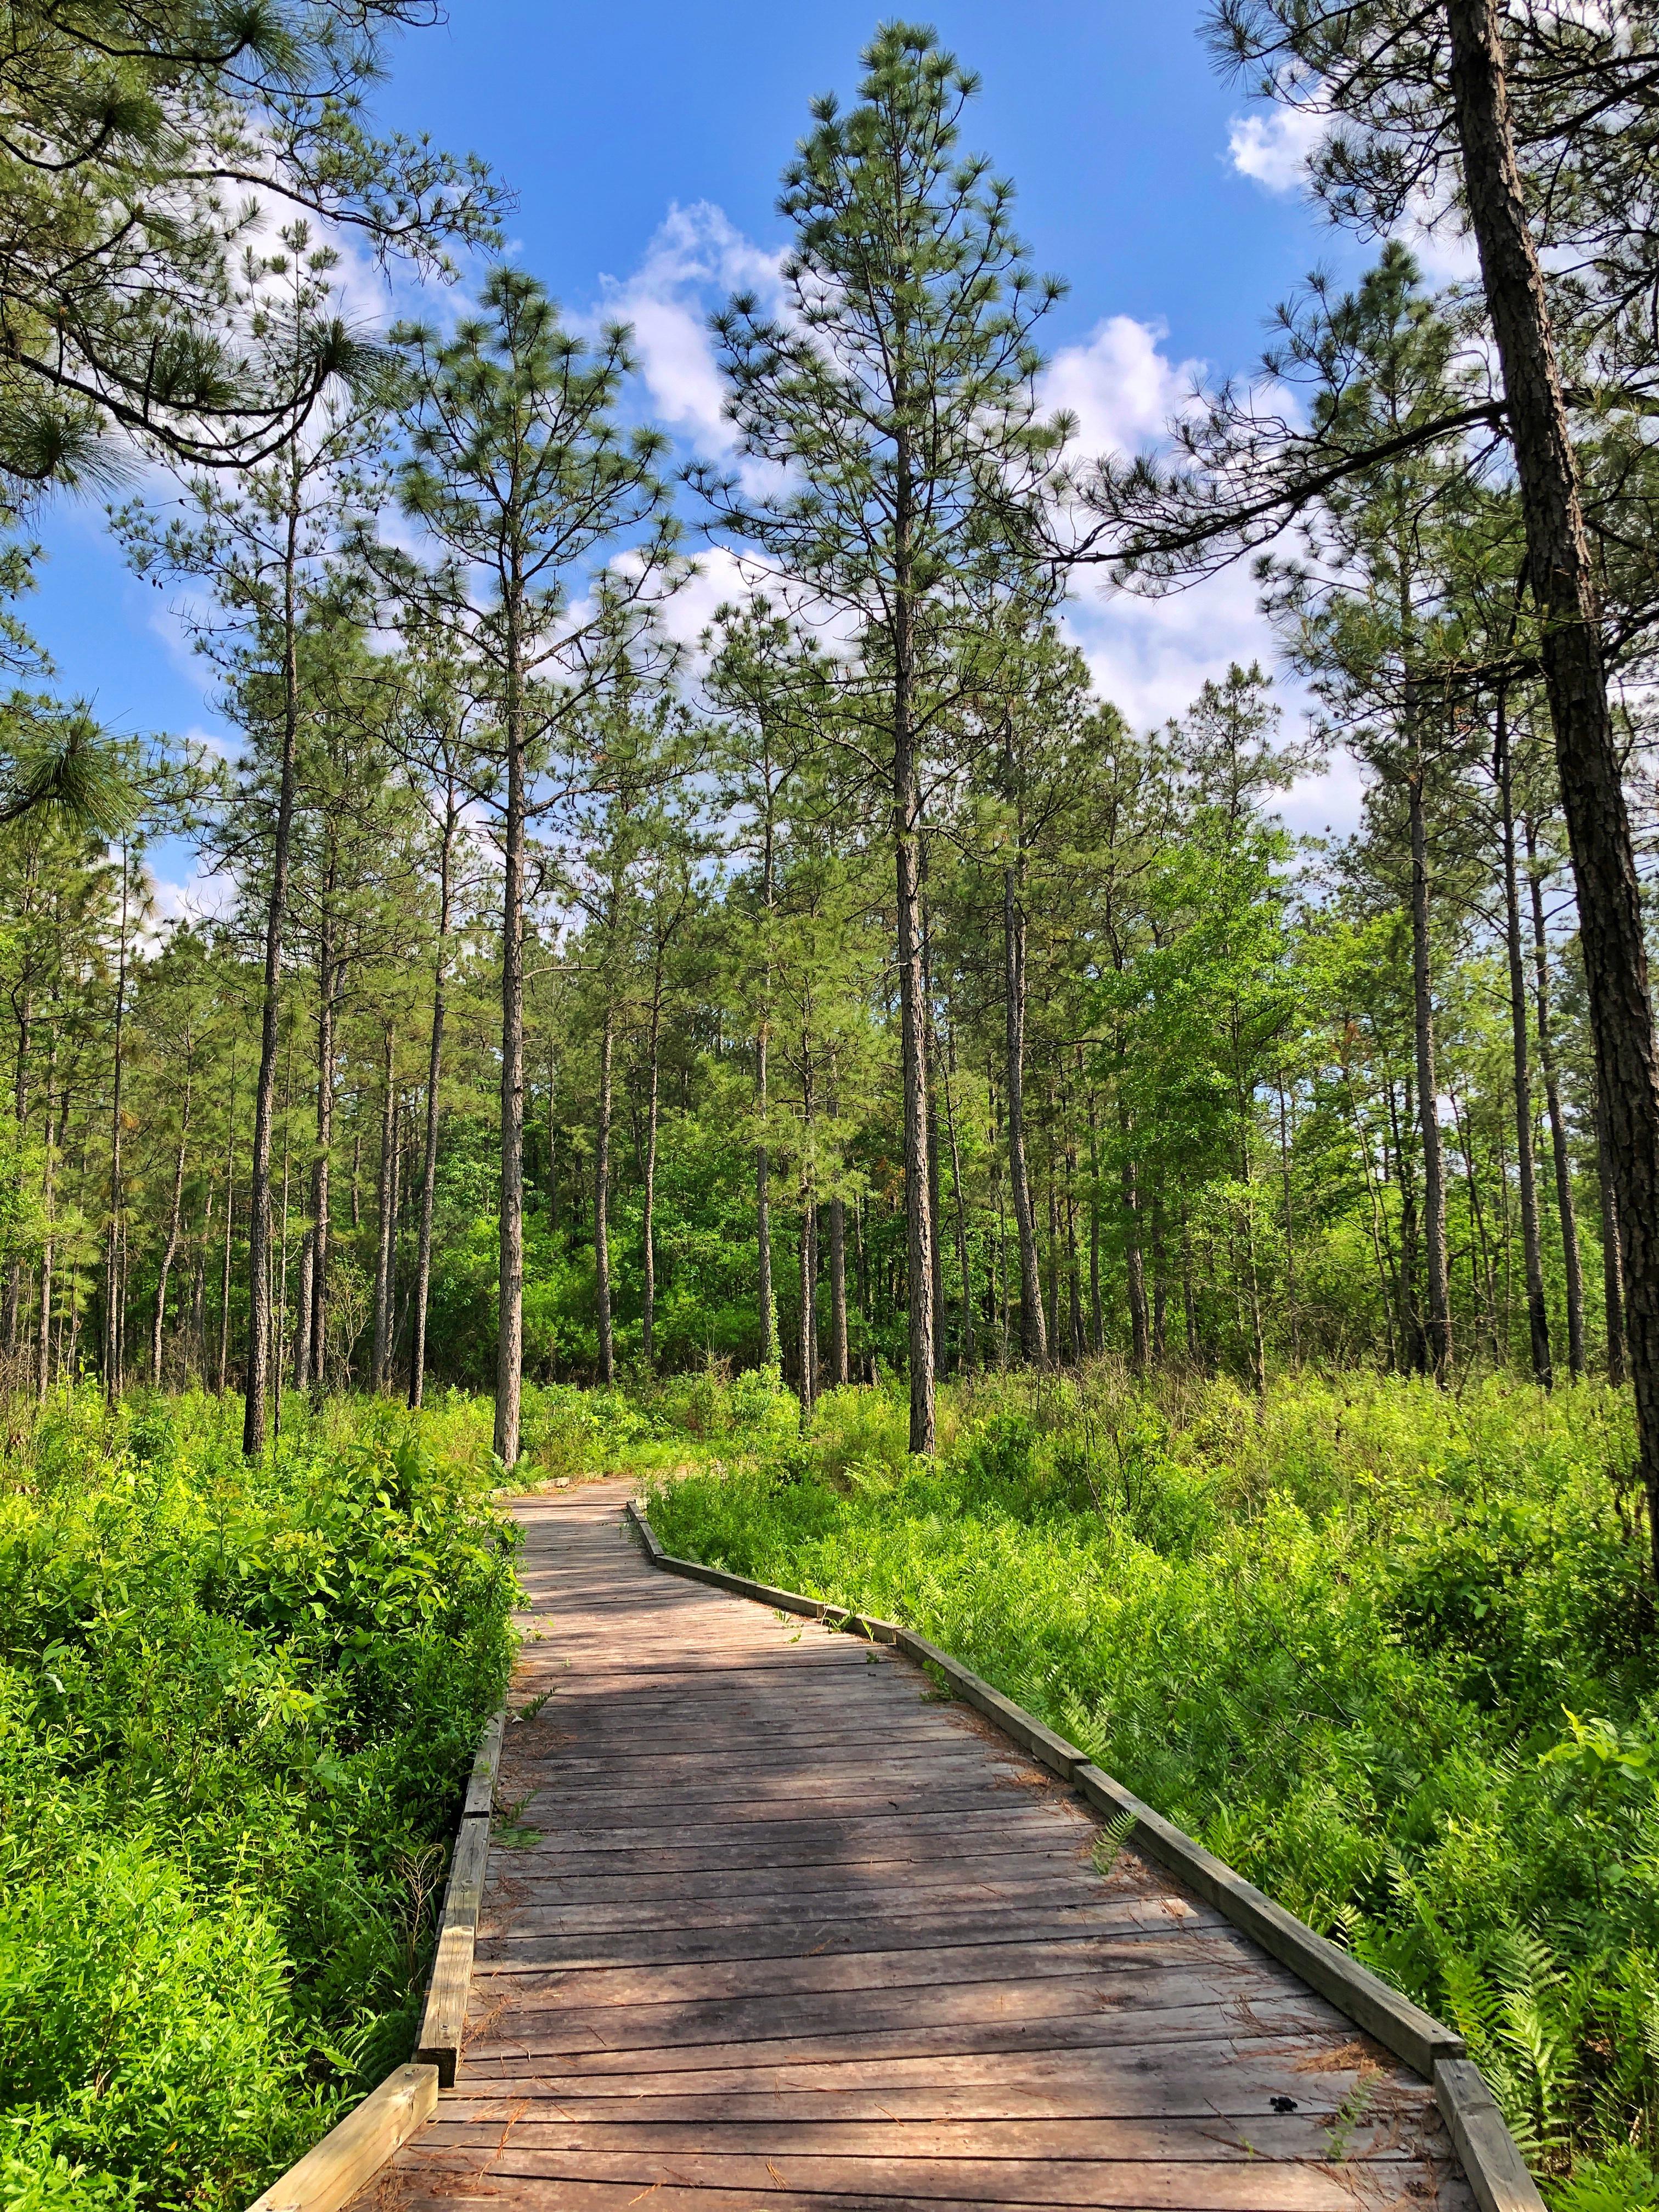 A wooden boardwalk curving through dense ferns and pines.